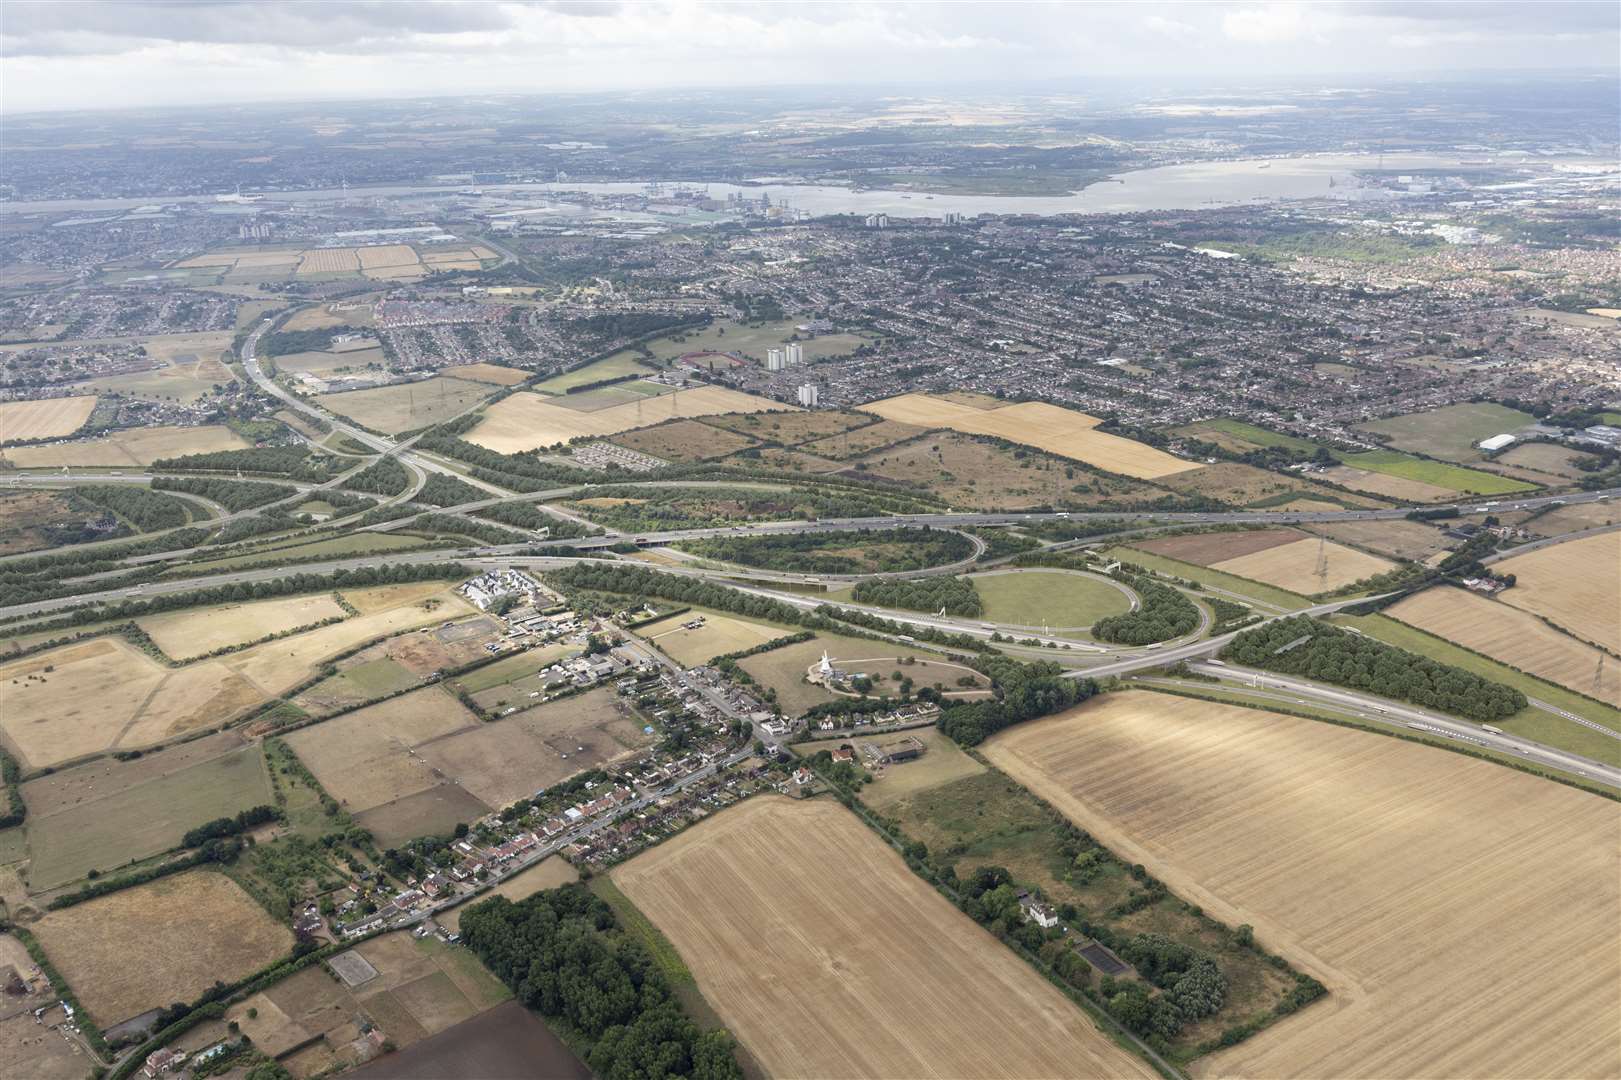 Proposed view of A13 and A1089 looking south